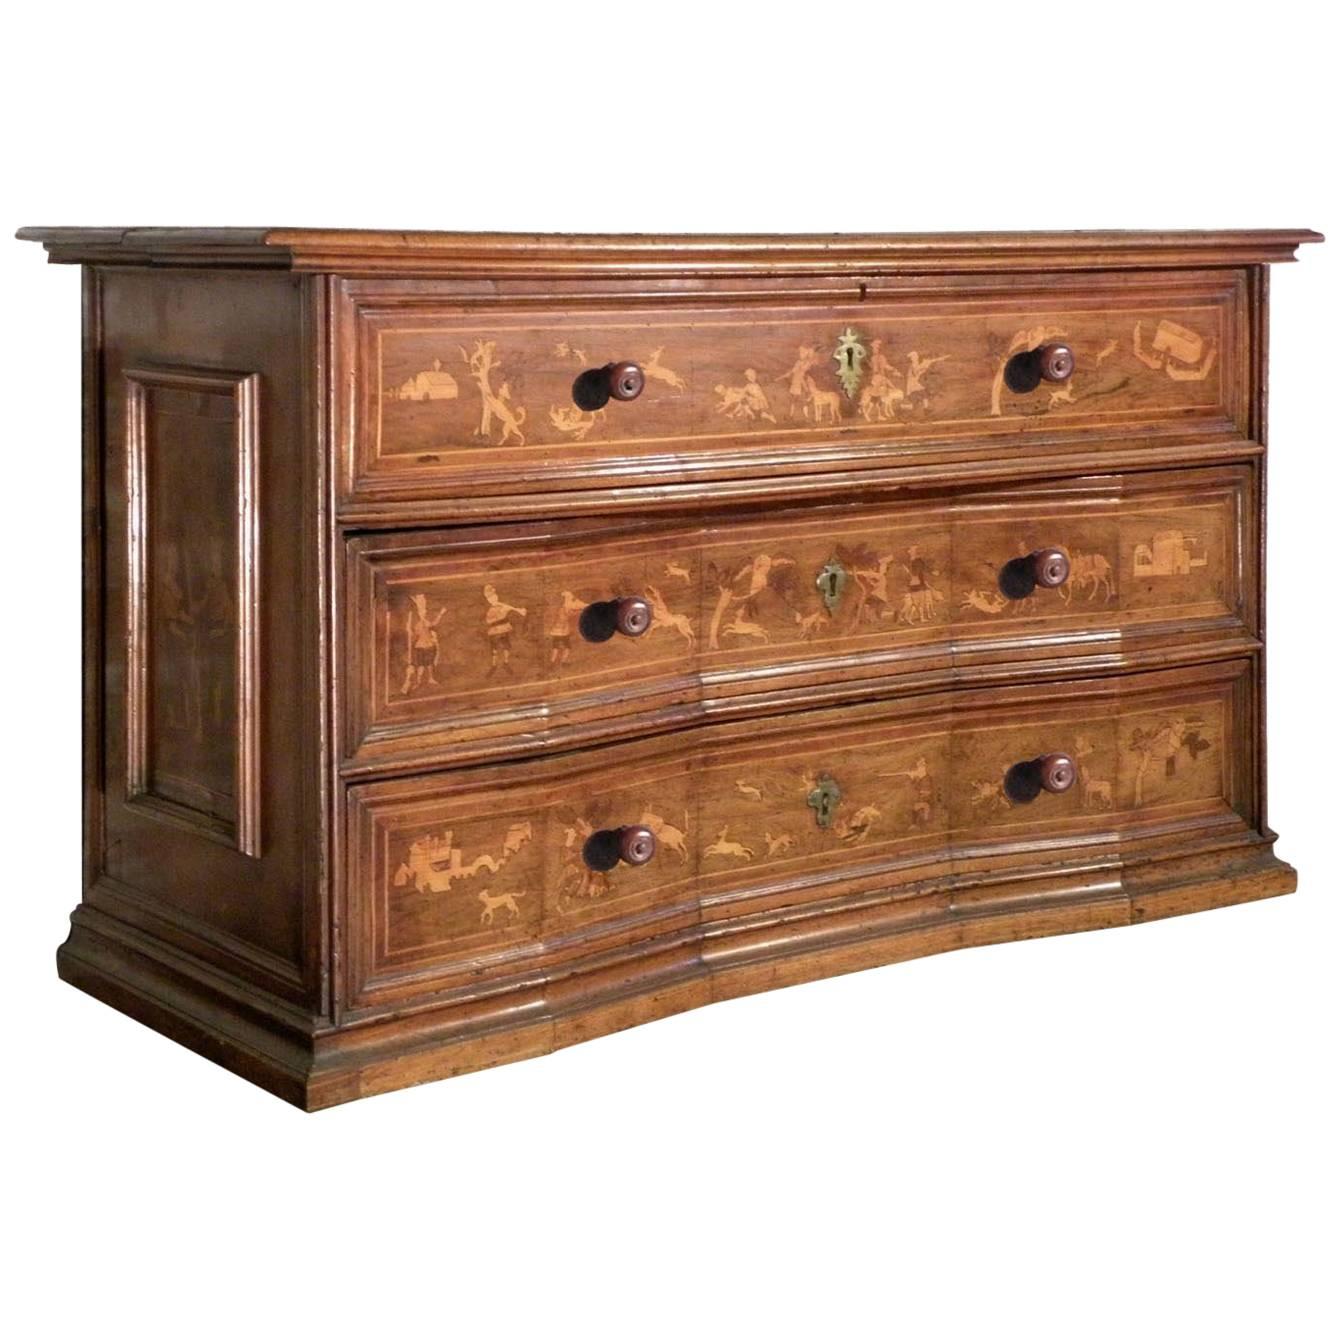 Italian Baroque Inlaid Early 18th Century Walnut and Fruit Wood Desk-Commode For Sale